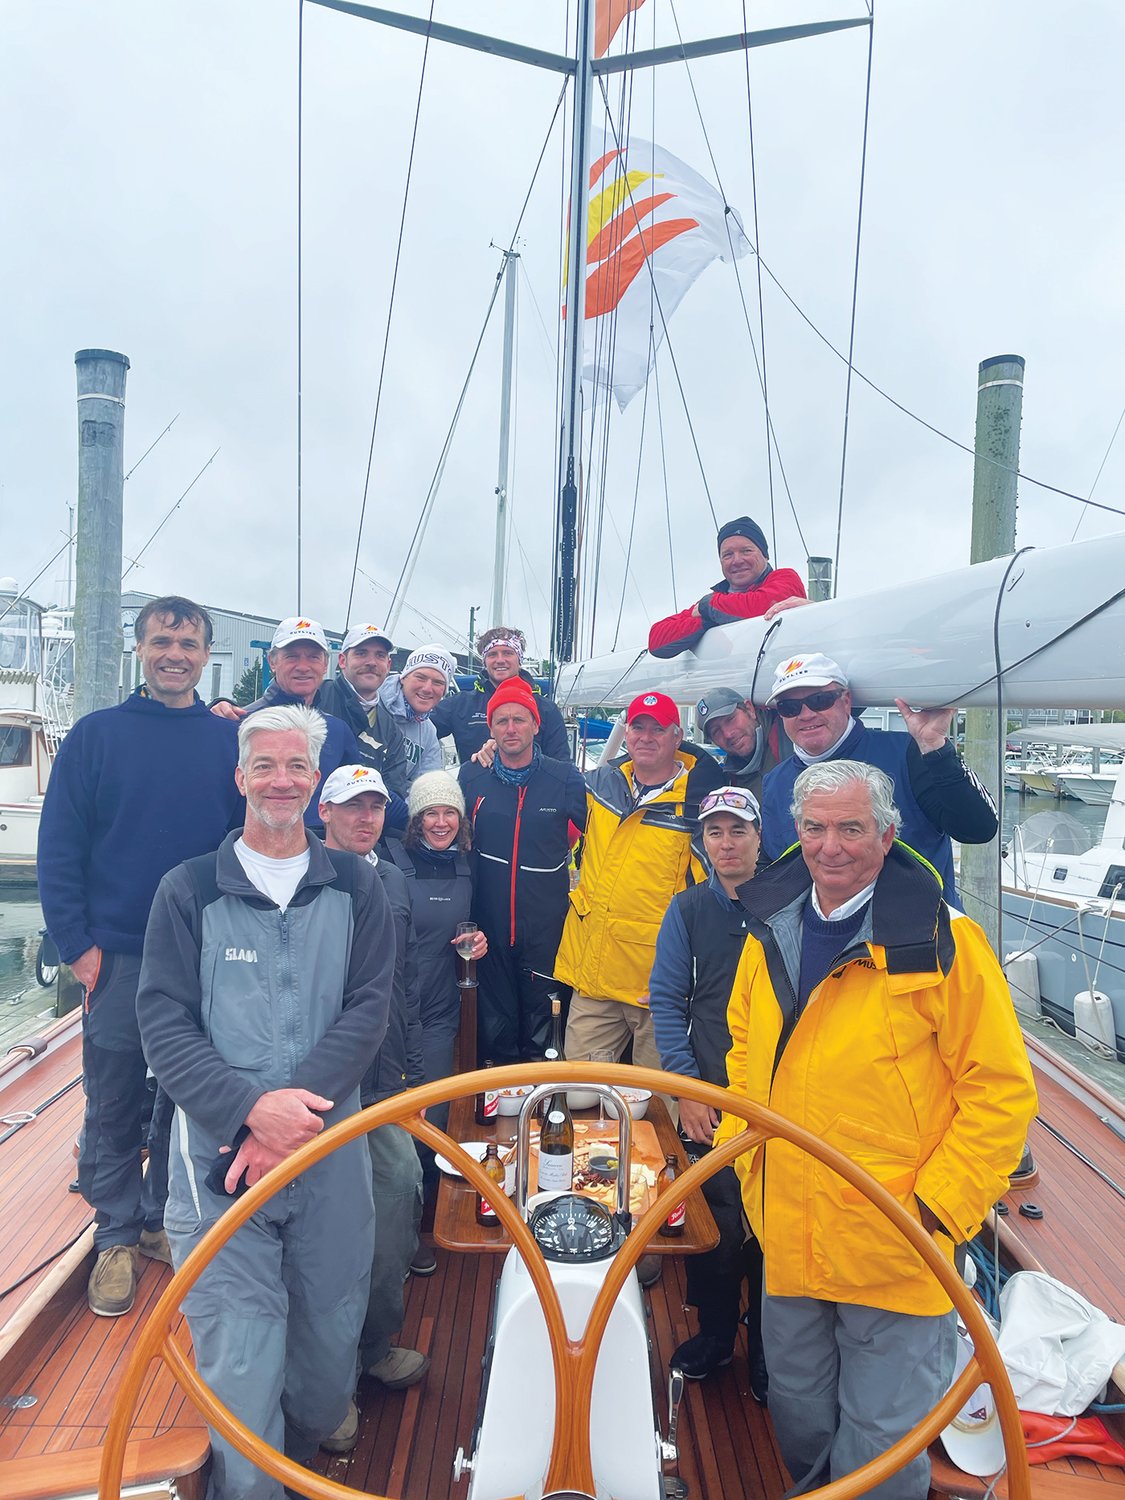 Harvey Jones, front right, and the crew of his 55-foot wooden sailboat Outlier, which won the 2021 Figawi race in the waters off Hyannis Sunday. The race did not come to Nantucket this year due to COVID-19 concerns, and was postponed a day due to high winds.